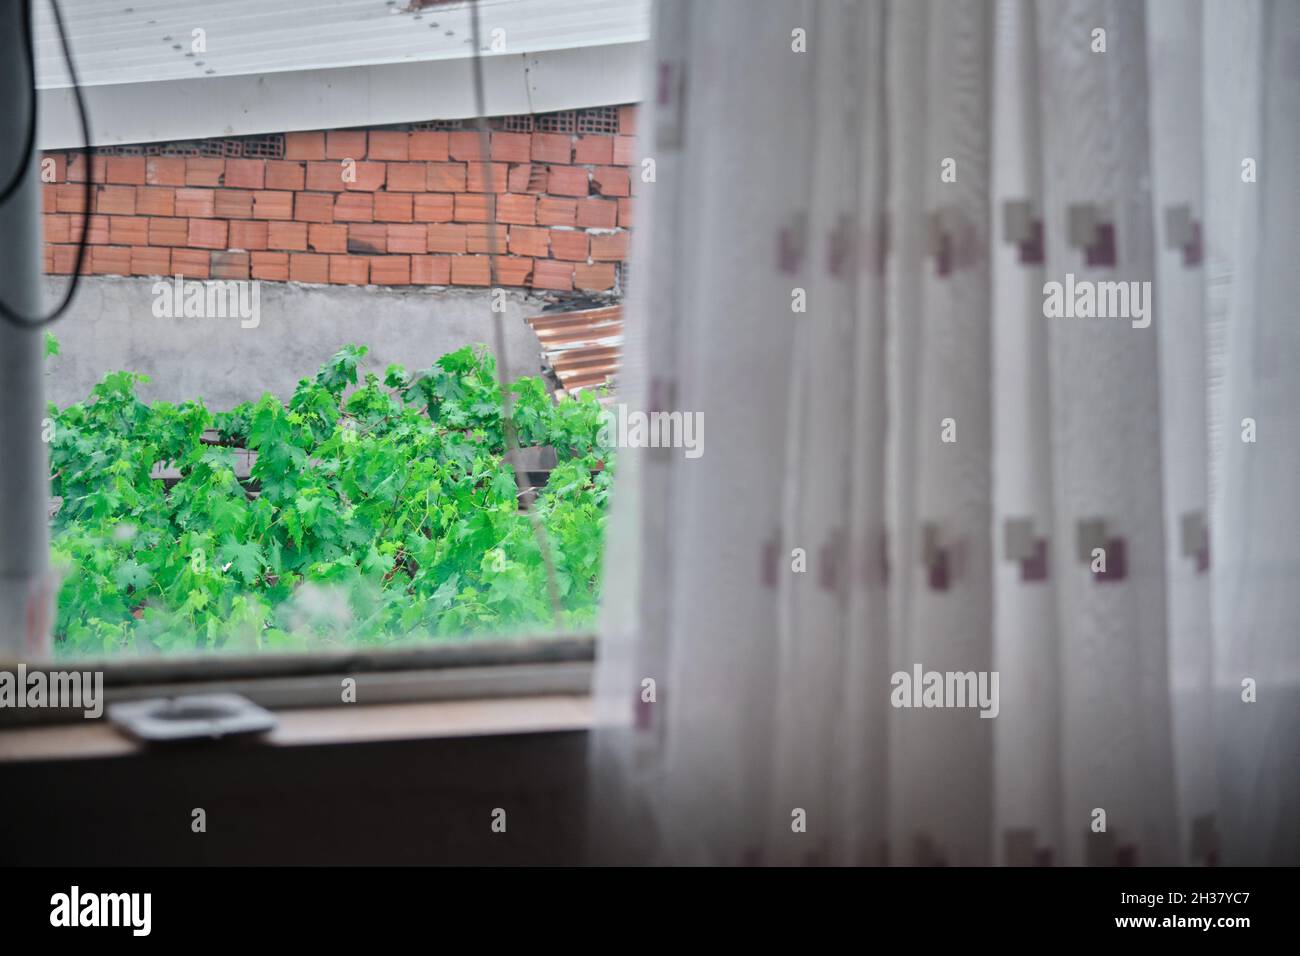 Behind the windows during rainy day with green grapevine and red bricks and roofs with ashtray on the windows Stock Photo